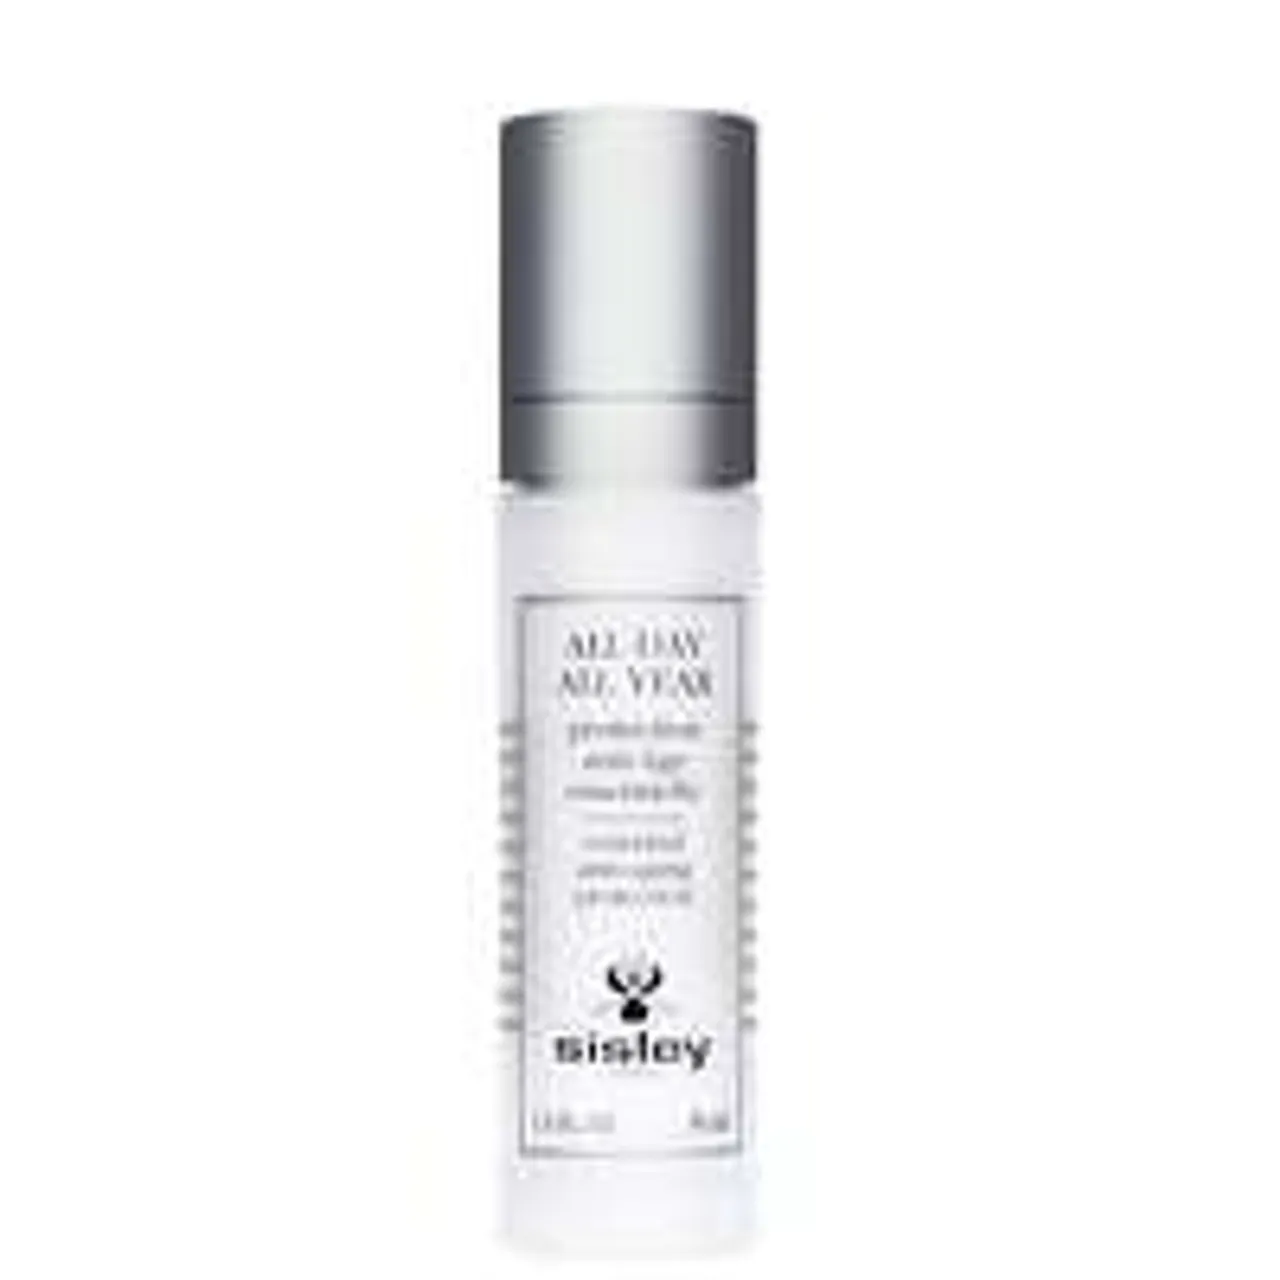 Sisley Day Care All Day All Year Essential Anti-Aging Protection 50ml